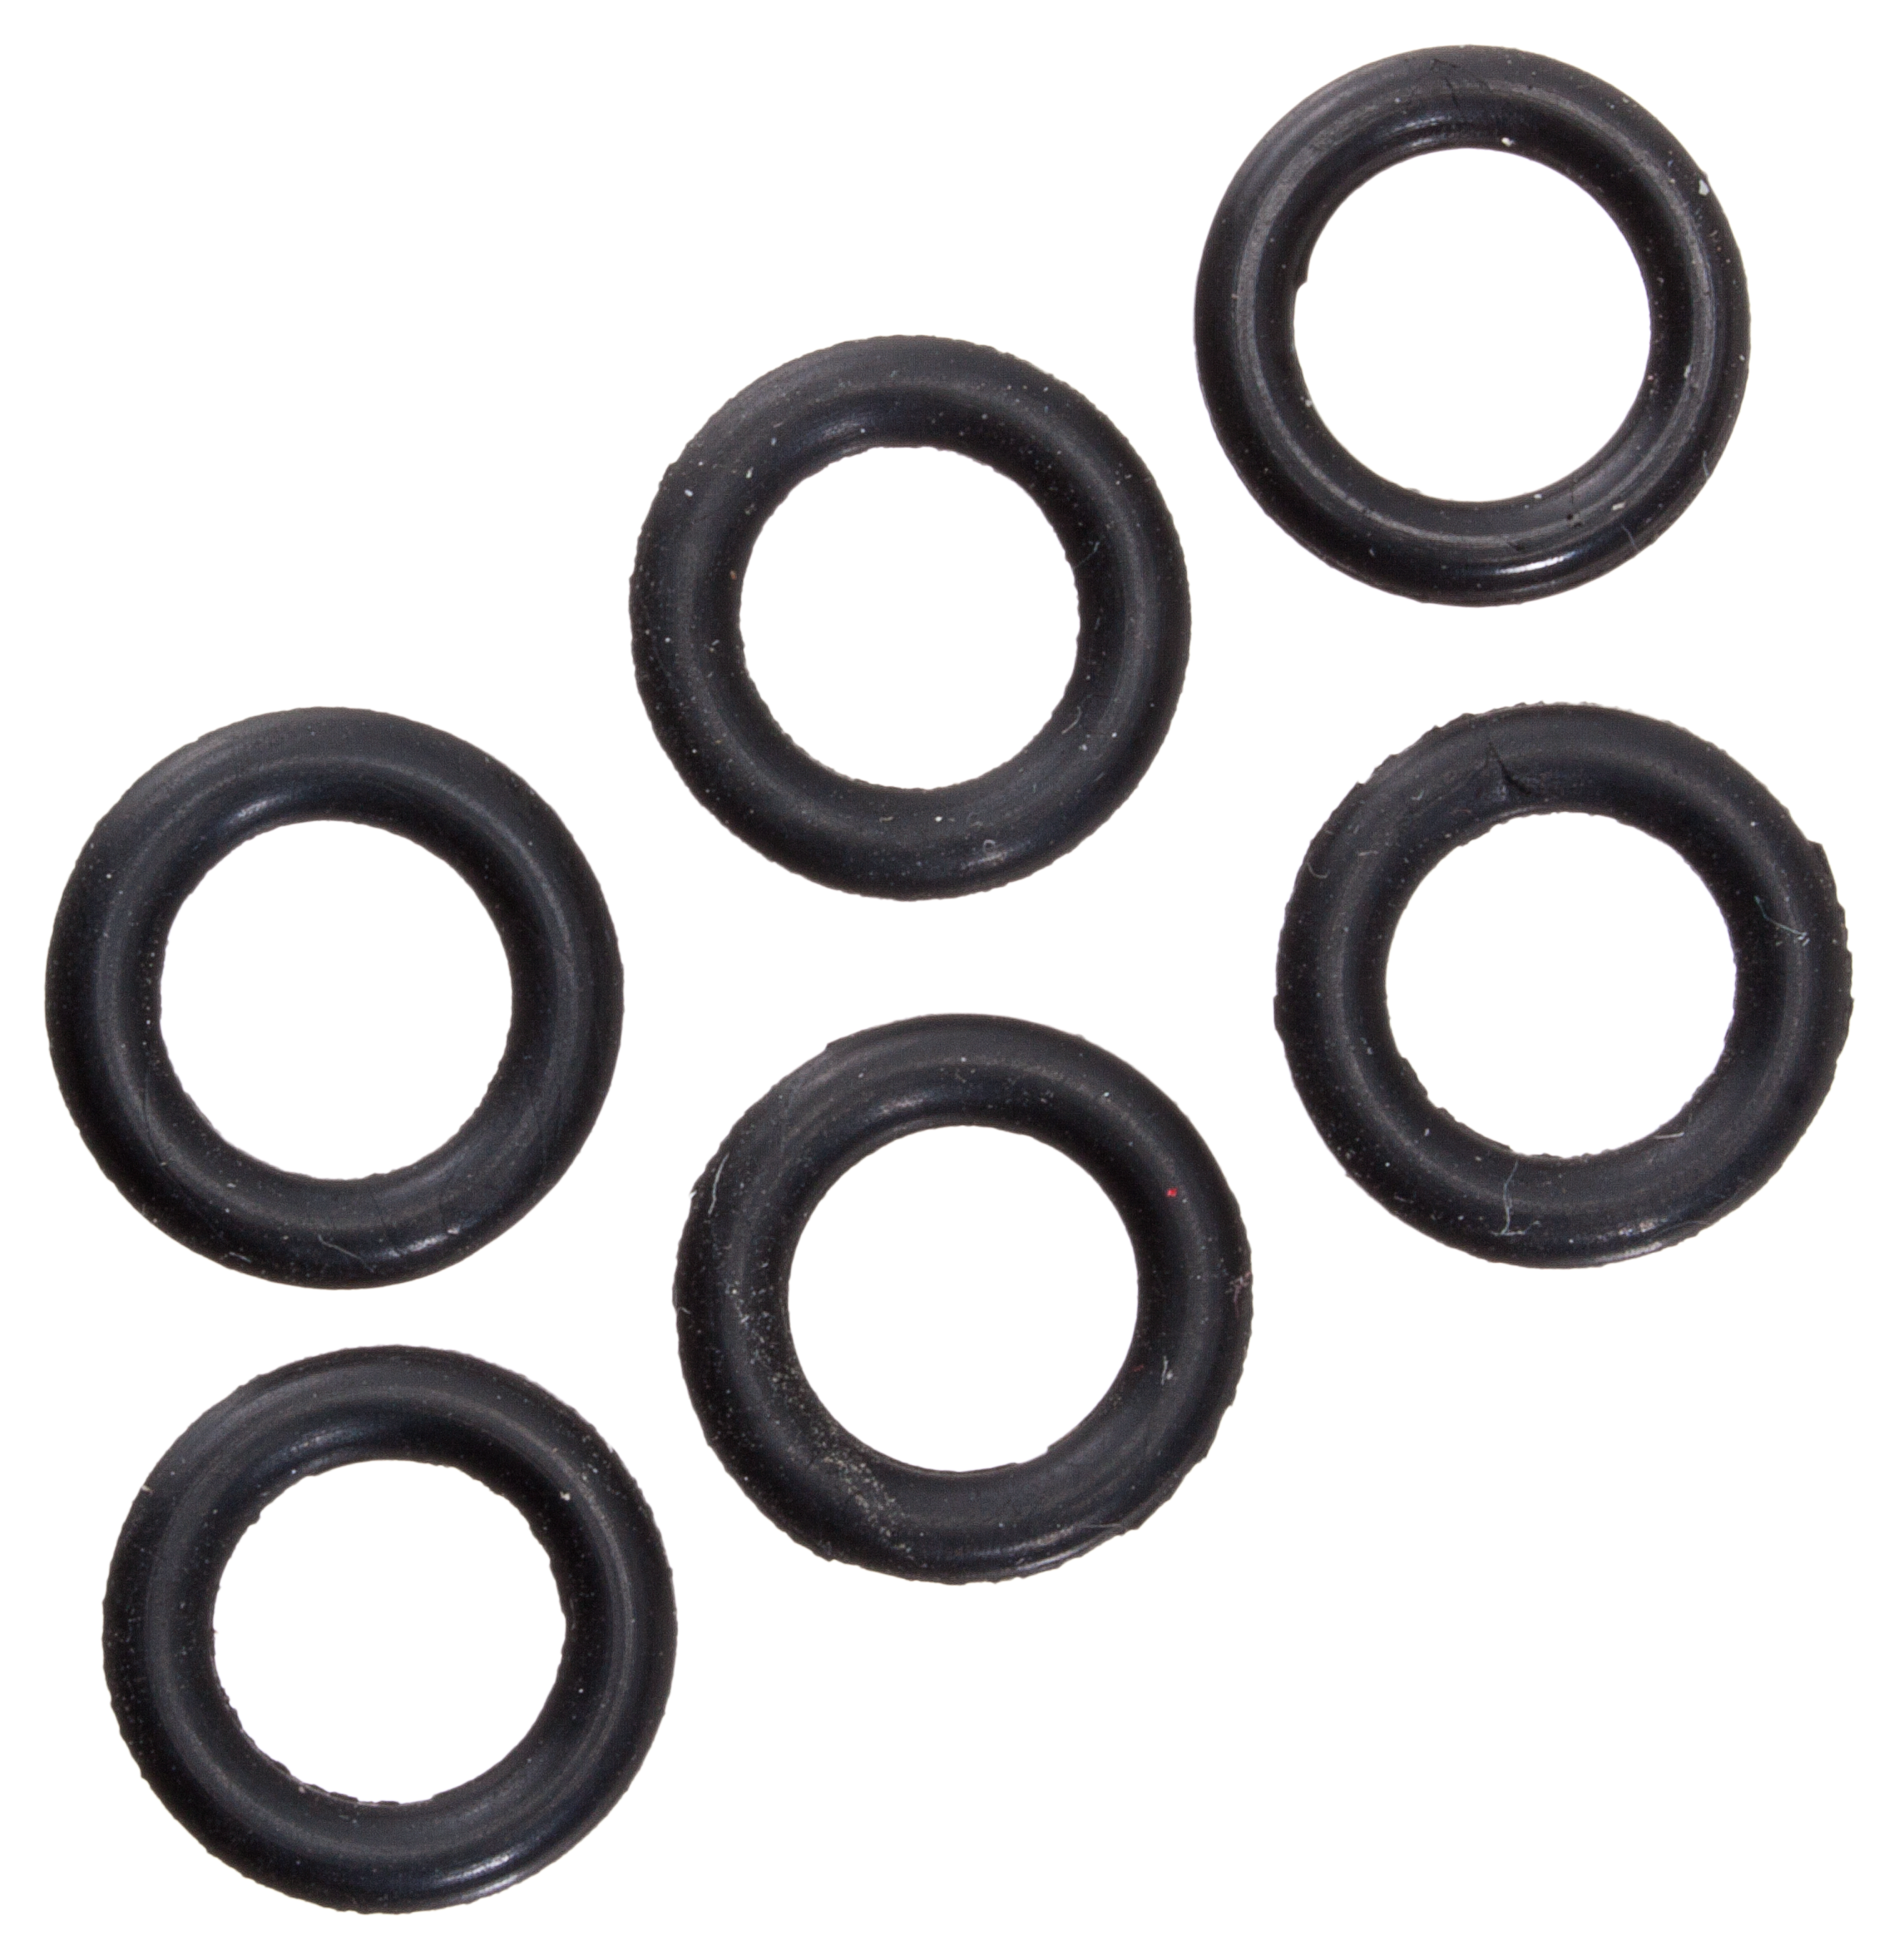 Bass Pro Shops XPS Quick Rigger Replacement Rings